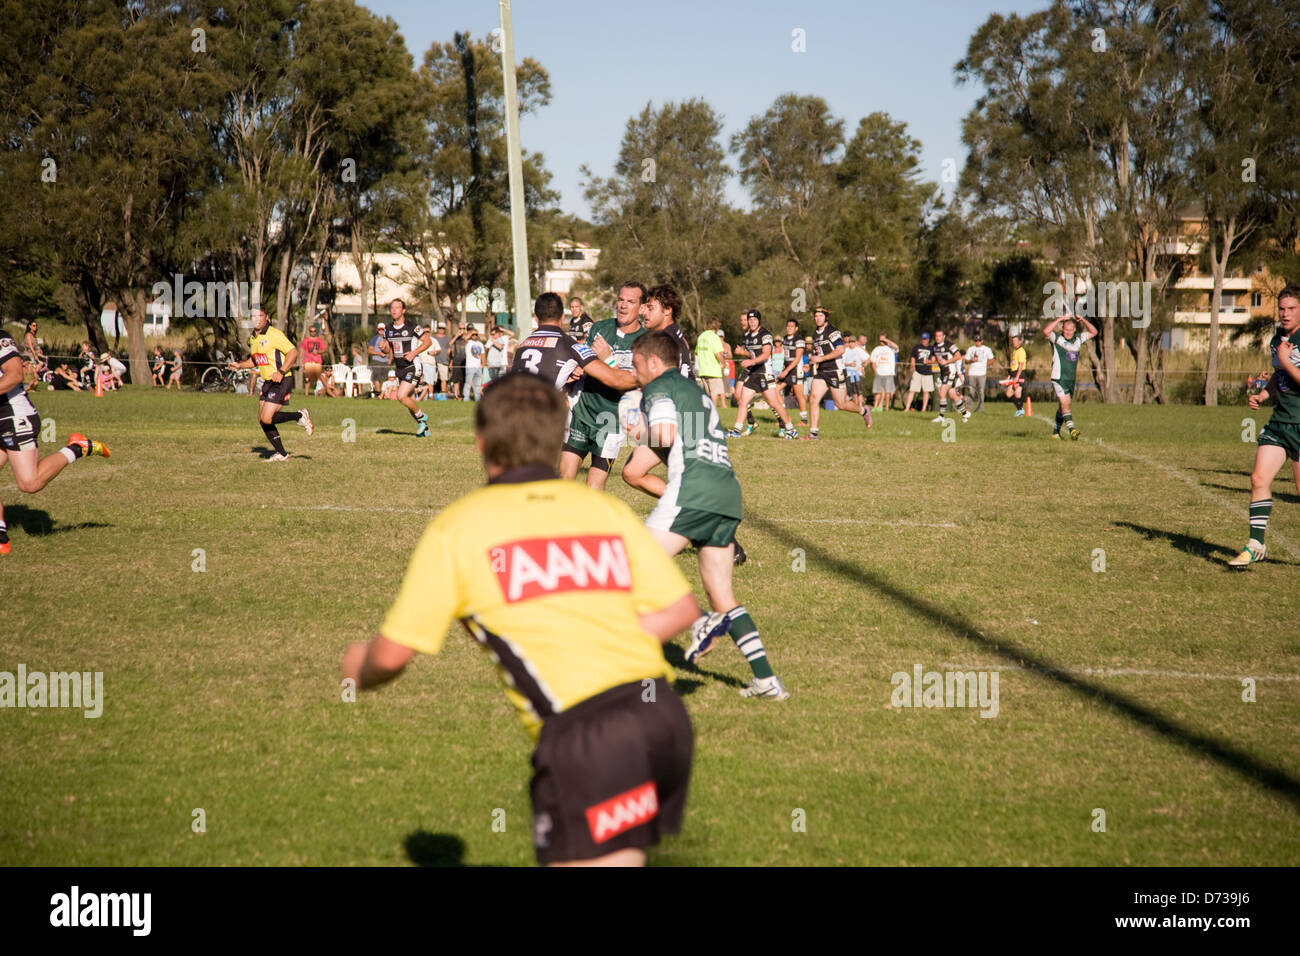 Referee linesman at australian rugby league match in Sydney Stock Photo